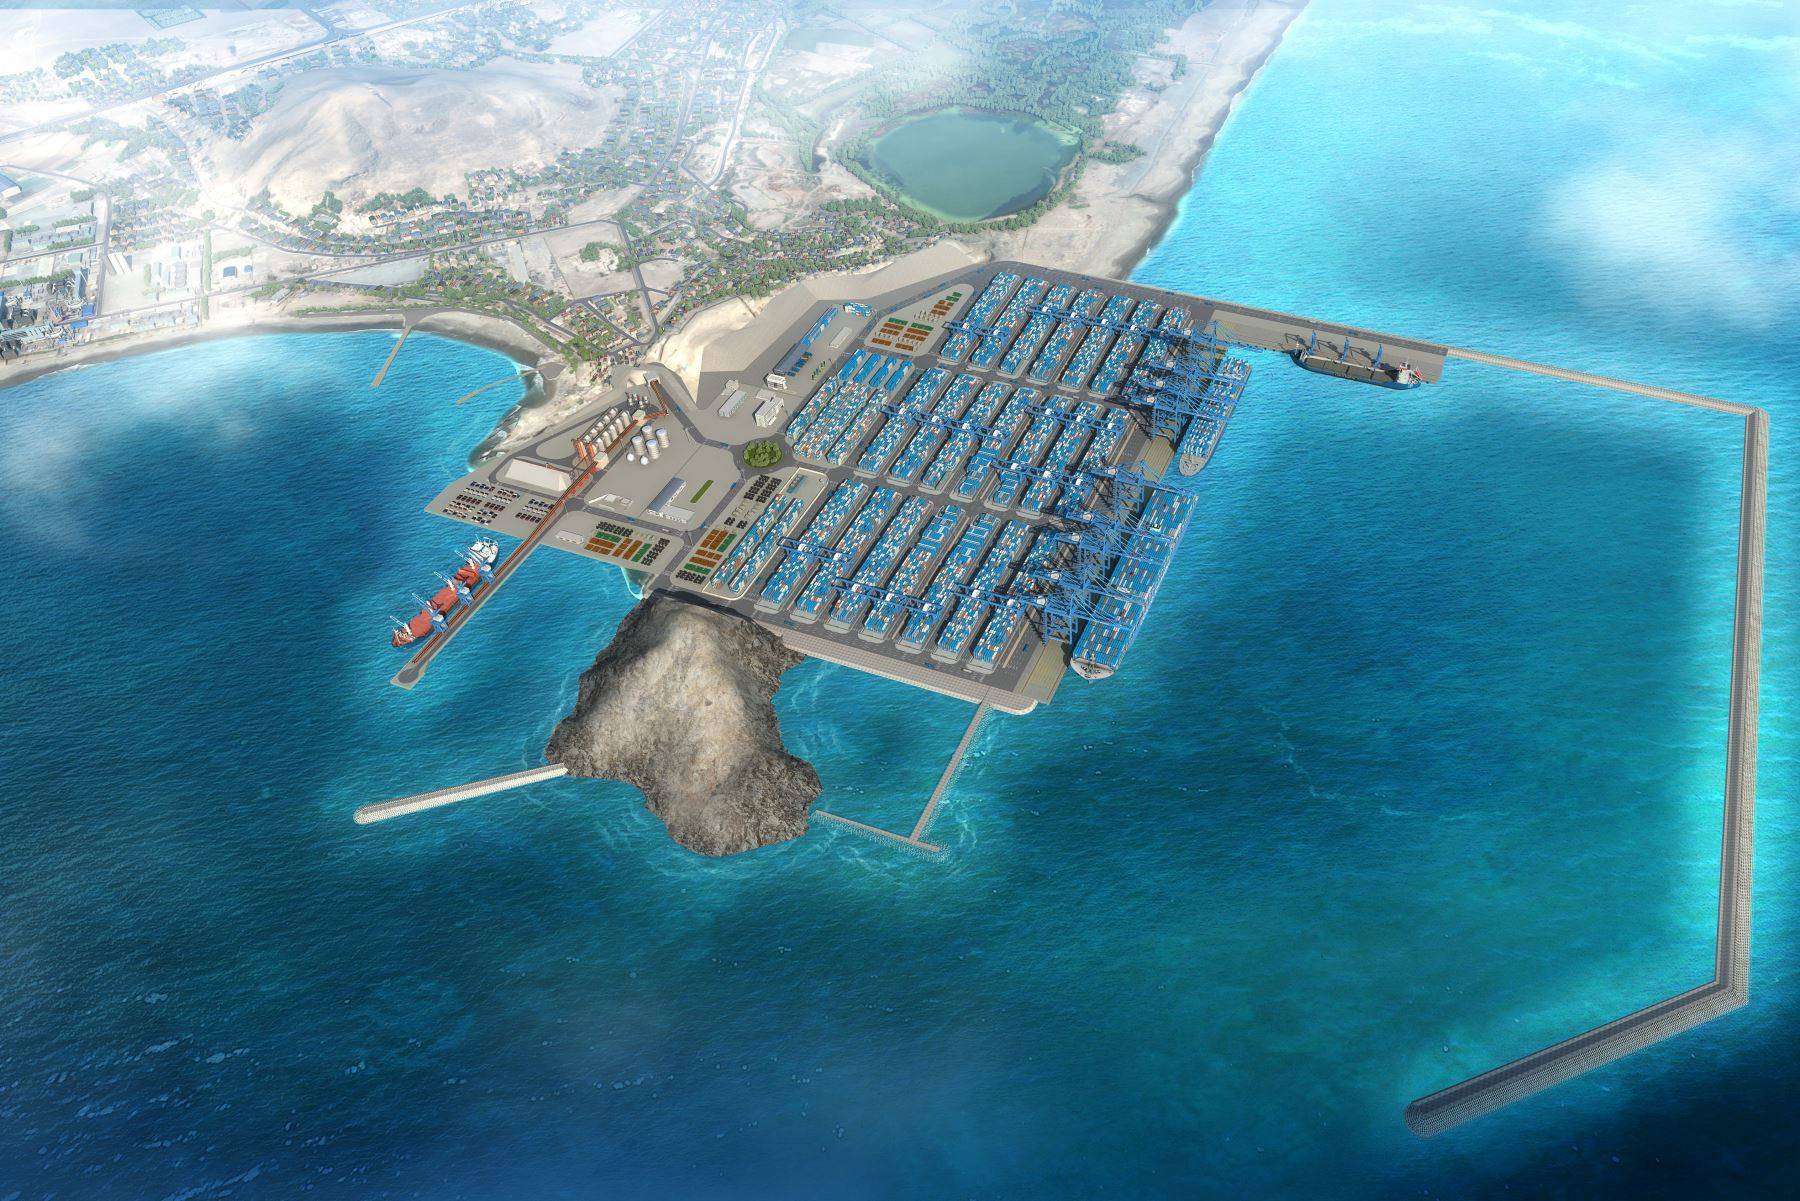 An artist’s impression of the port of Chancay in Peru. Photo: Cosco Shipping